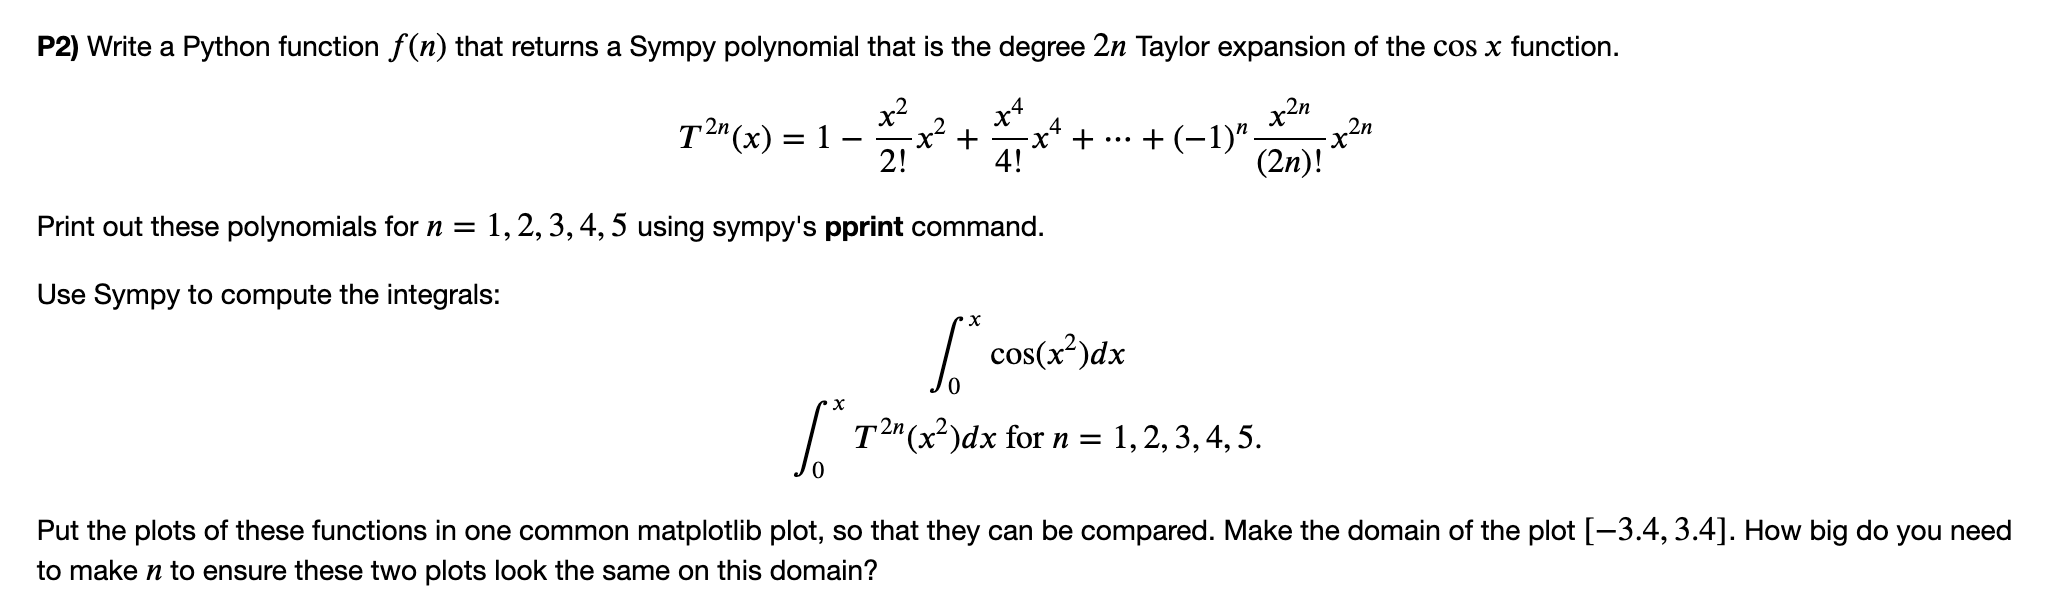 P2) Write a Python function f(n) that returns a Sympy polynomial that is the degree 2n Taylor expansion of the cos x function